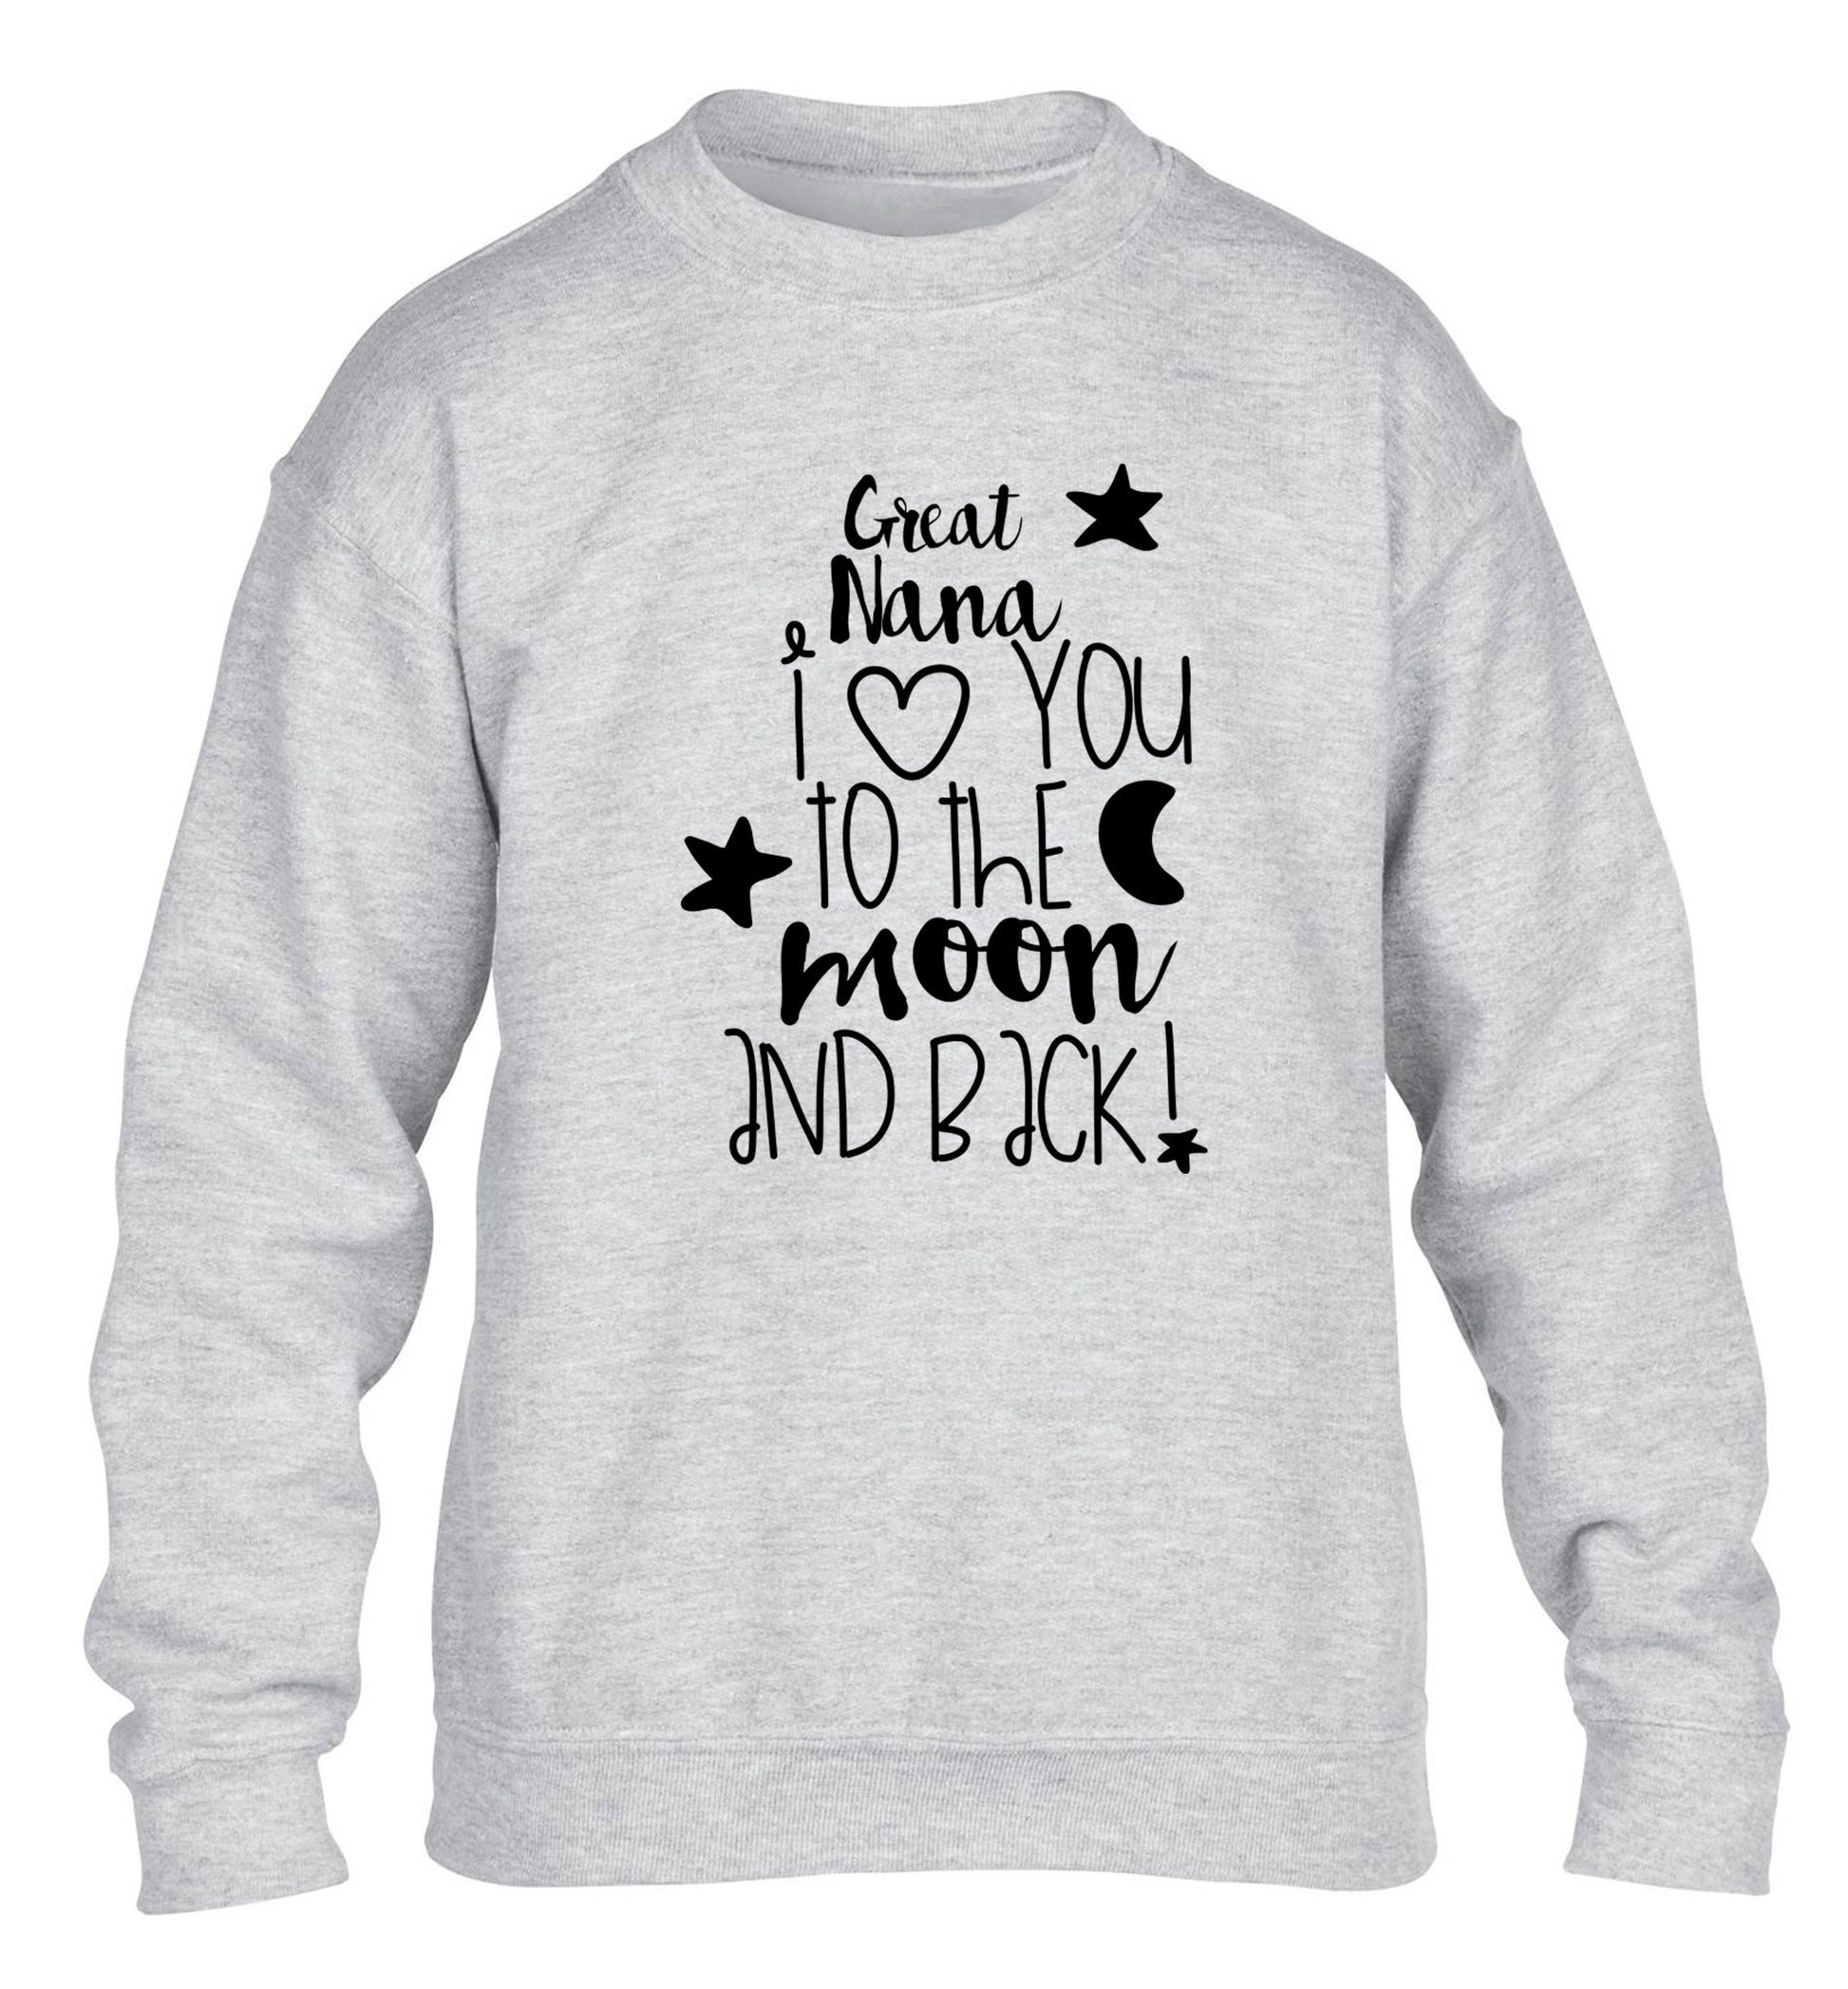 Great Nana I love you to the moon and back children's grey  sweater 12-14 Years